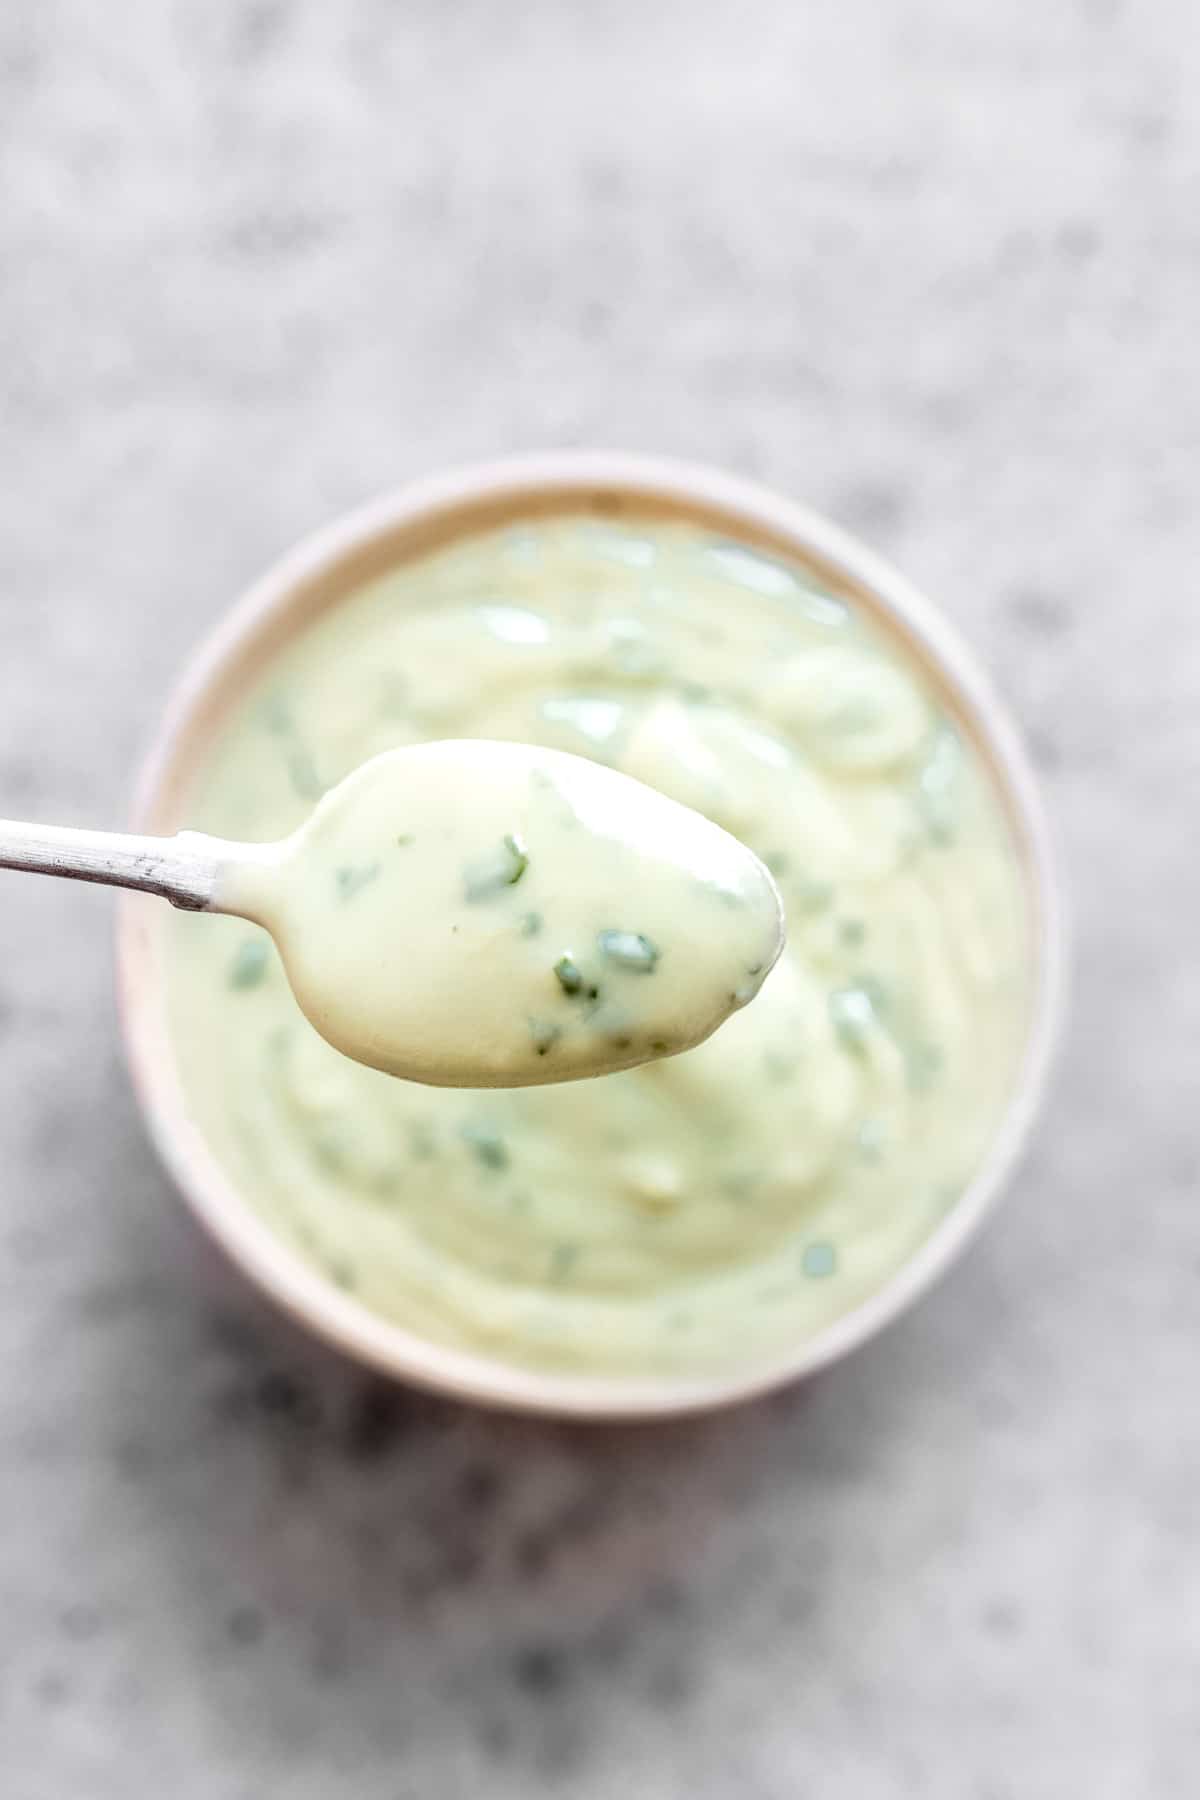 Avocado lime crema blender sauce in a bowl with a spoon.